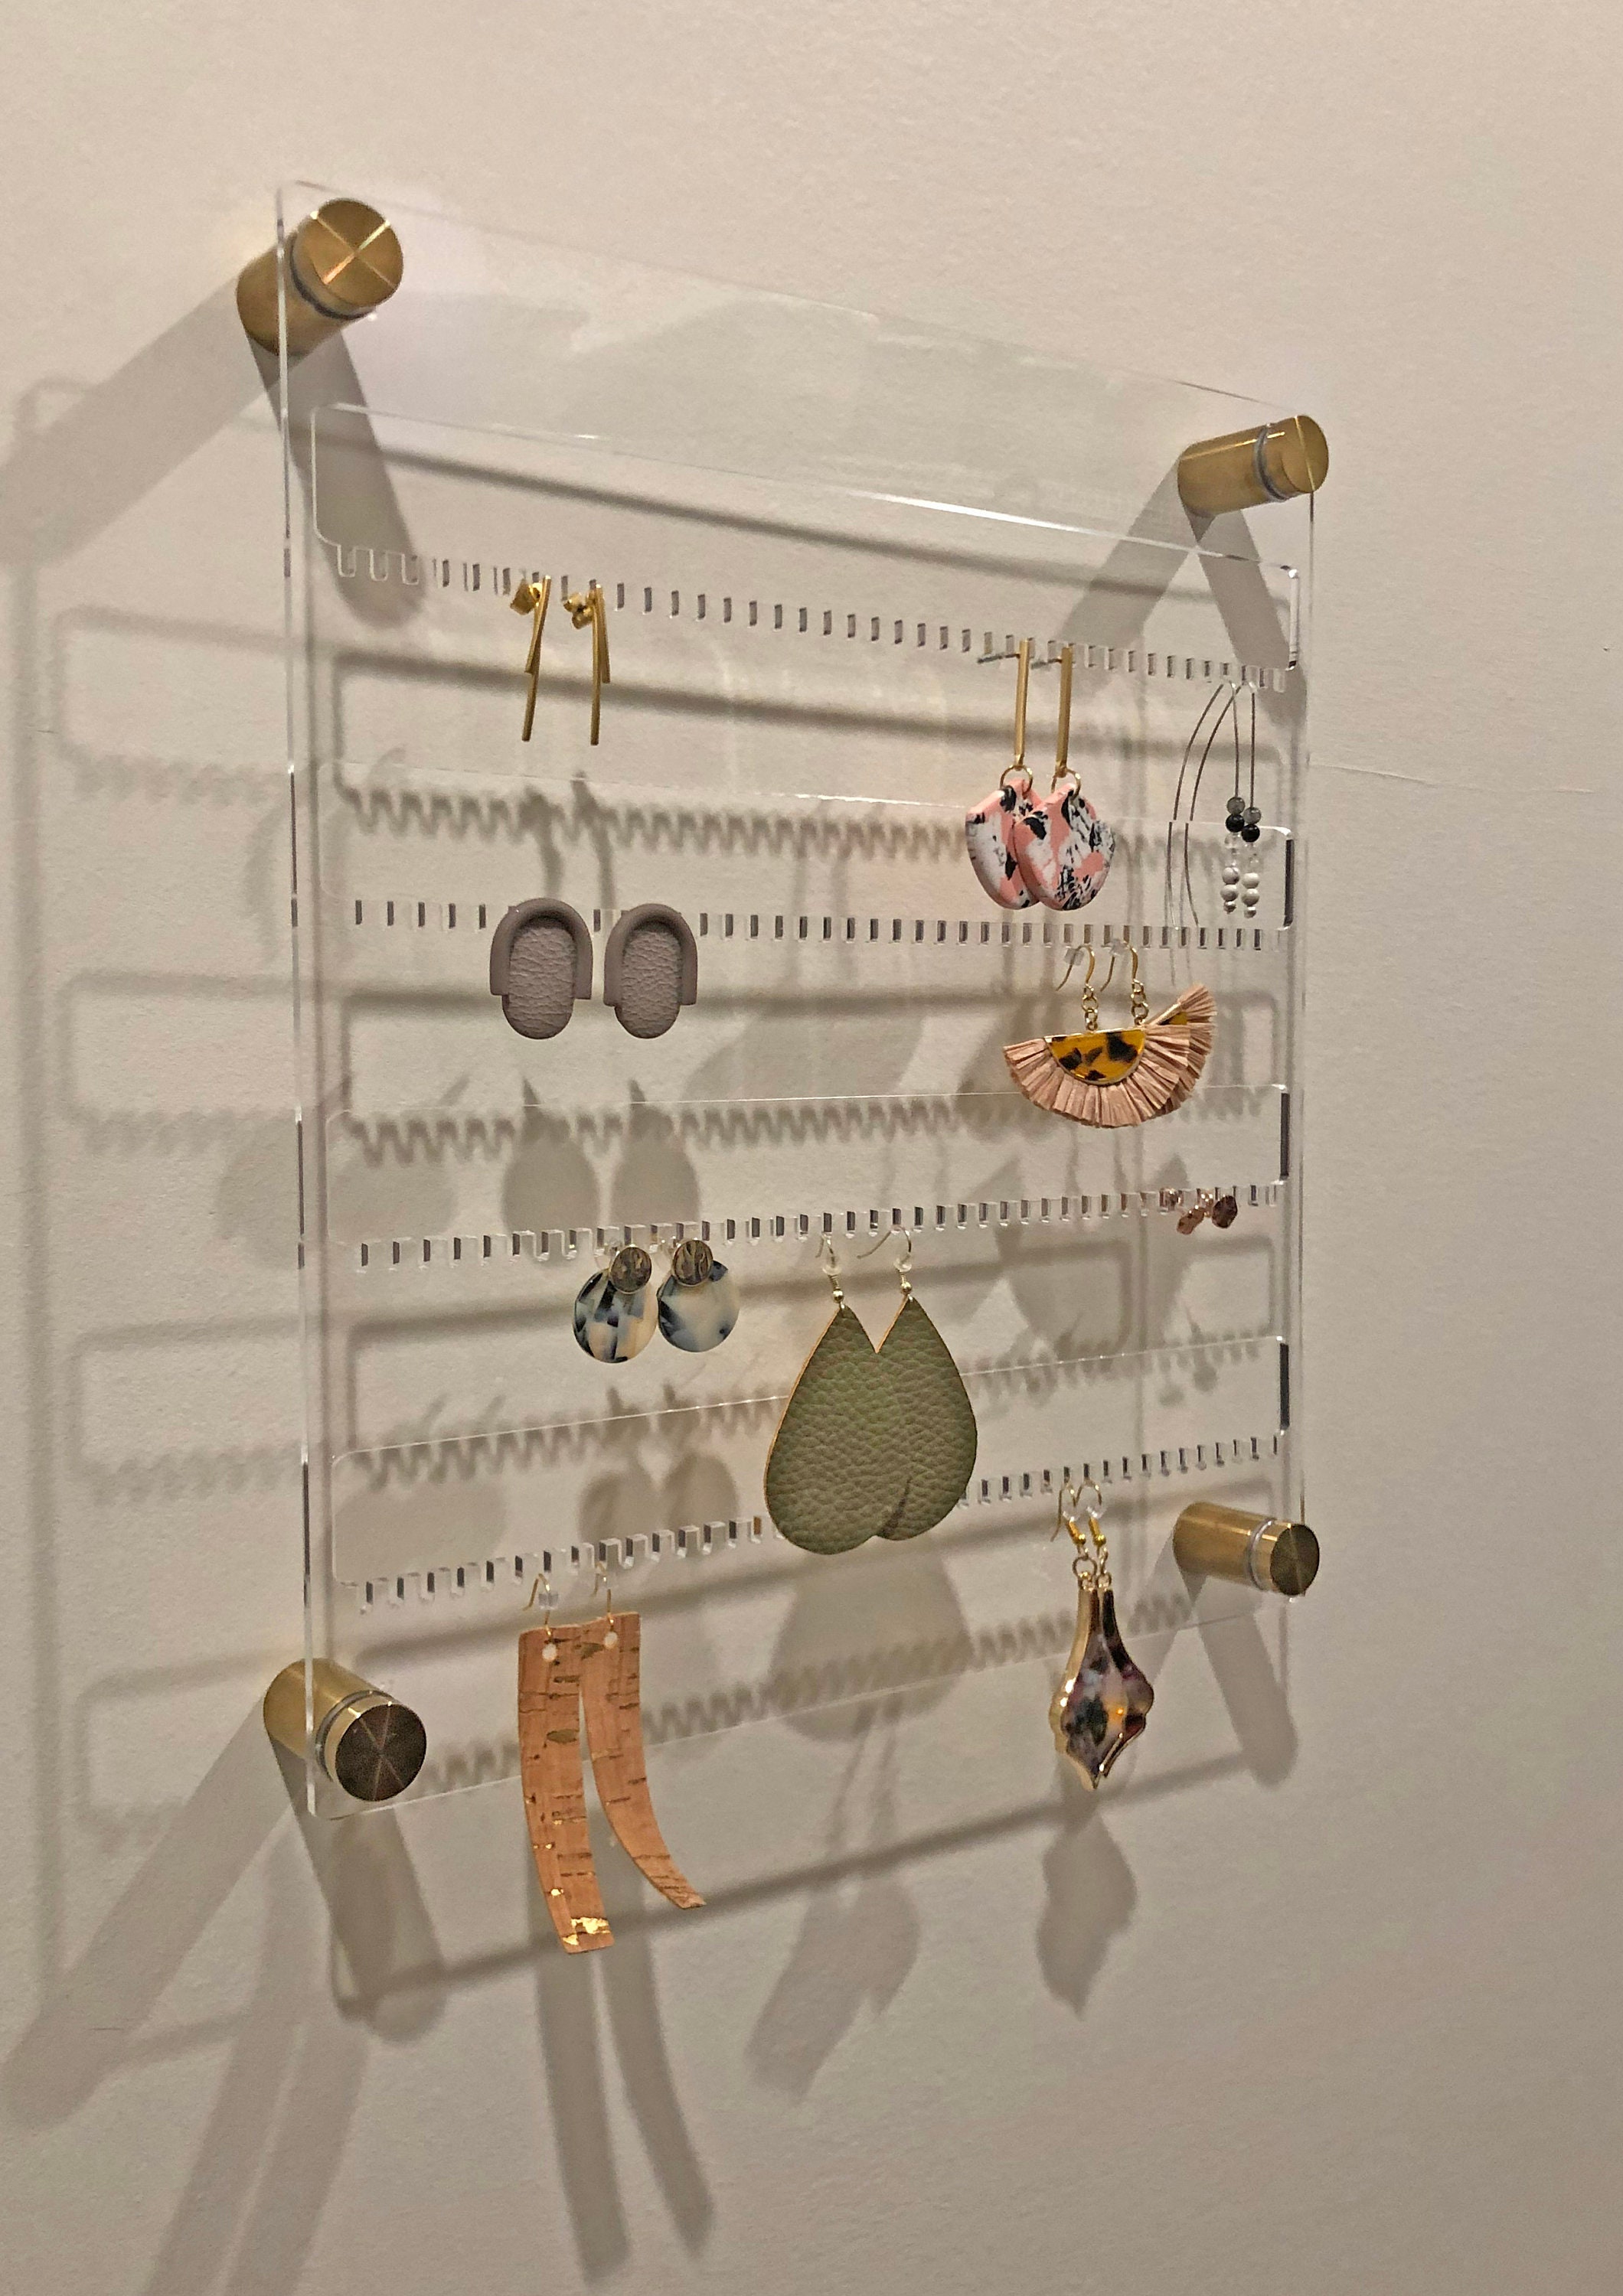 Transparent Acrylic Wall-mounted Earring Display Stand, Jewelry